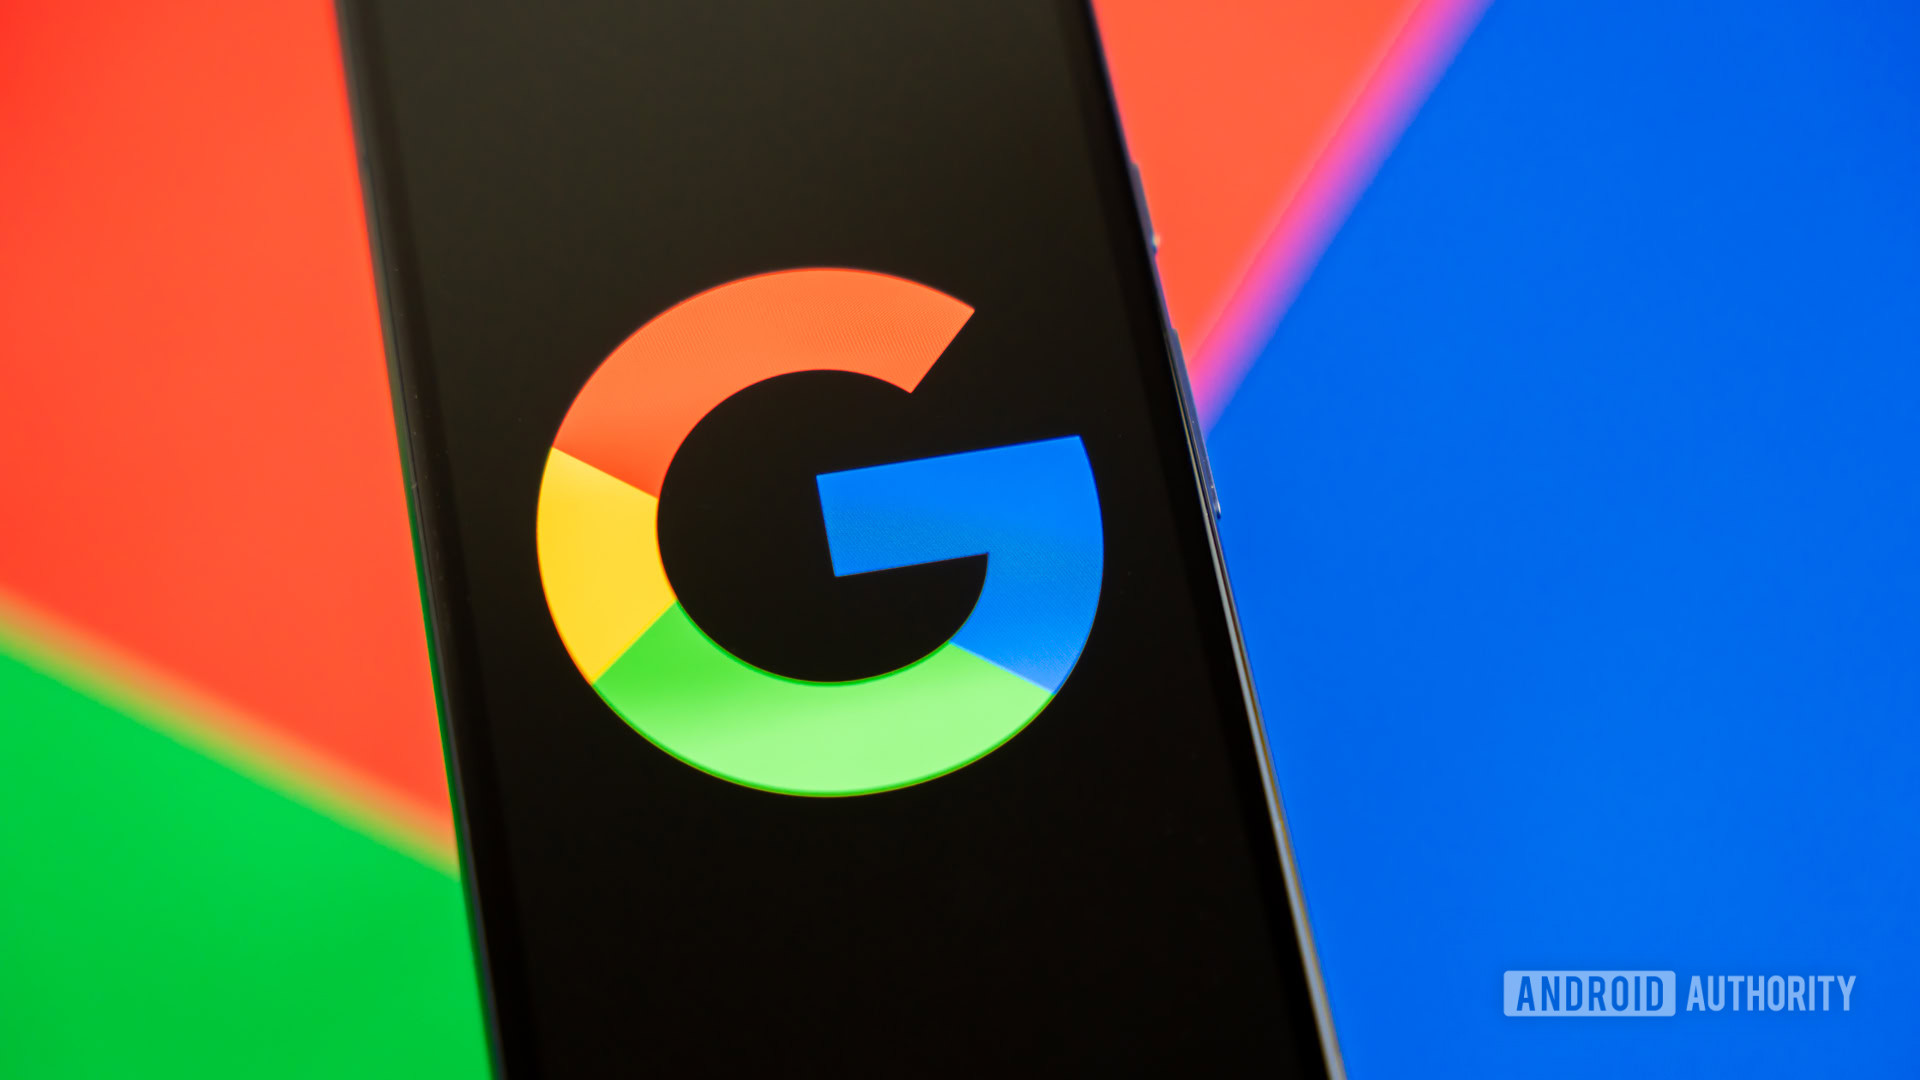 Google can keep a phone if you send for repair with non-OEM parts (Update: Changing policy)